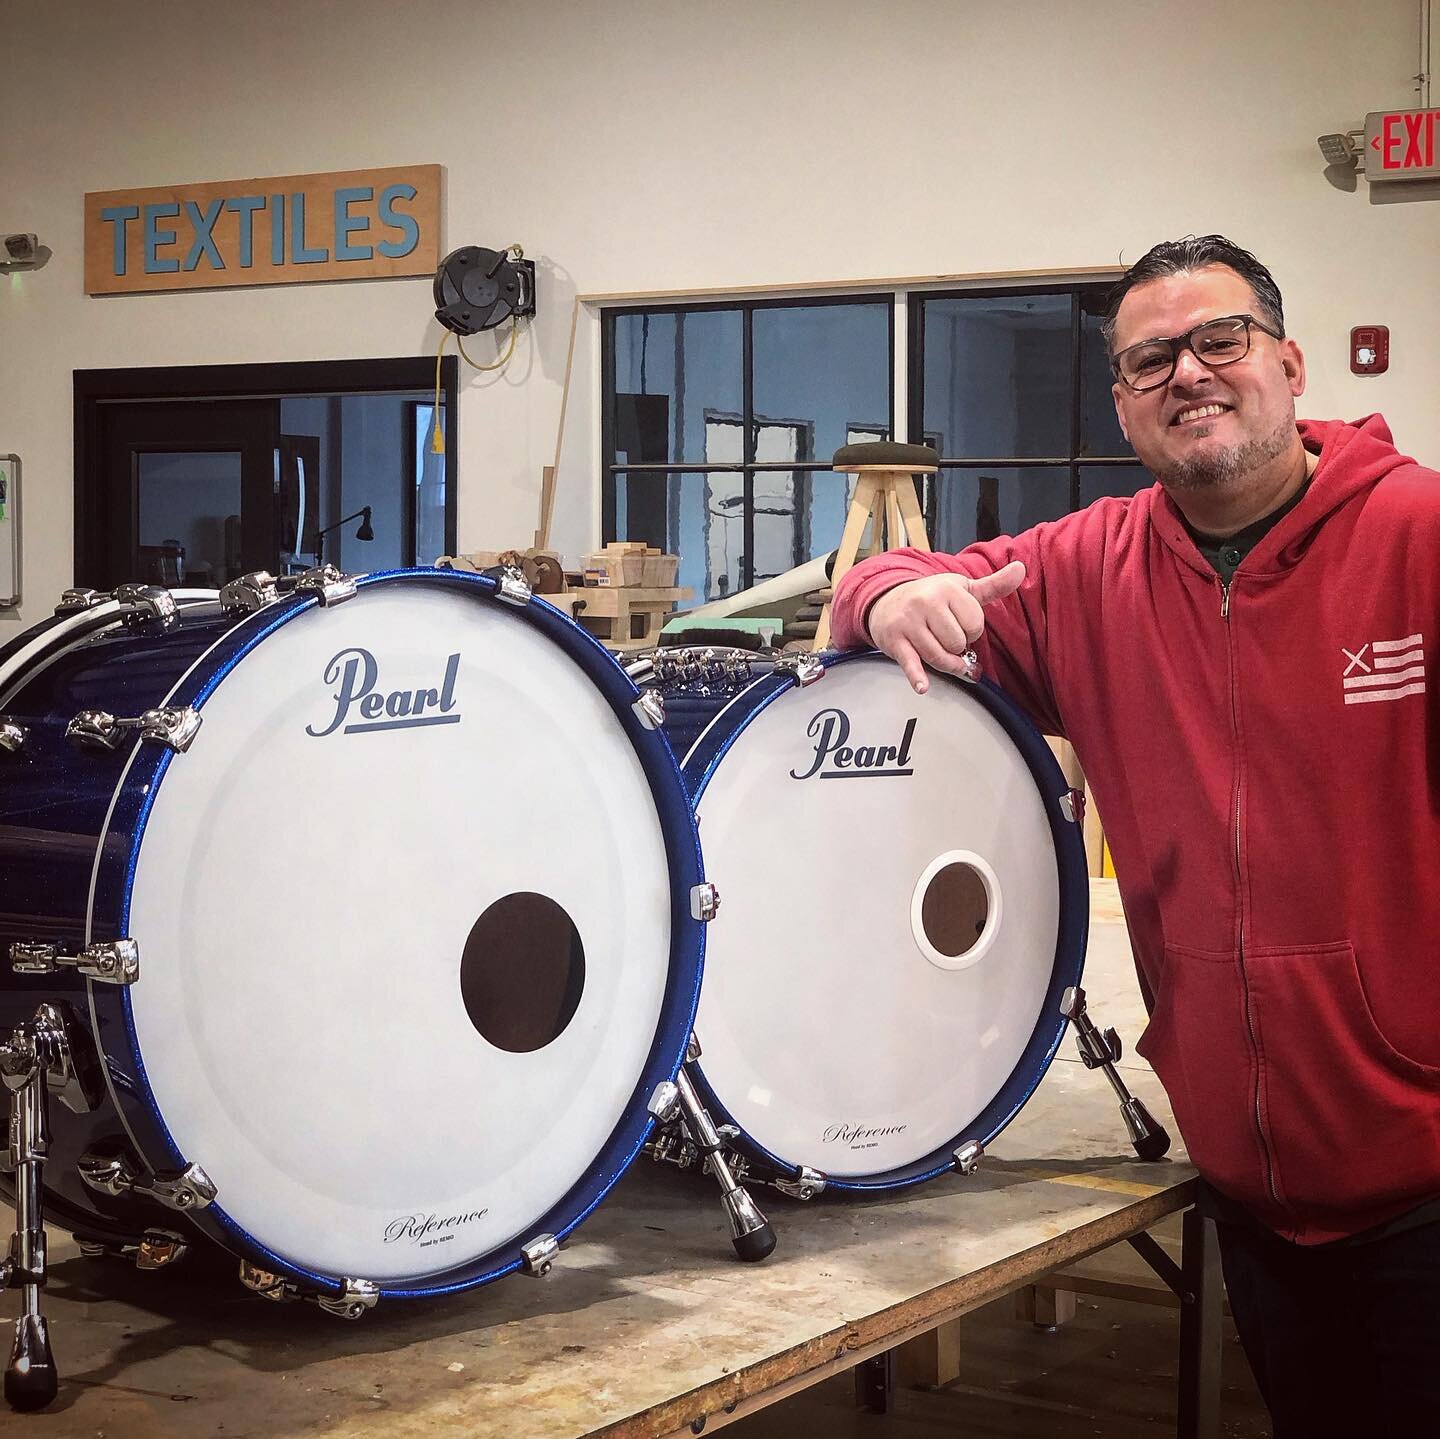 🧰🛠️ 2 custom mods for @juancarlitomendoza on his @pearl_drums Reference Series kick drums. Cut down his 22x18 to 22x13&rdquo; and his 20x16 to 20x11 as well as added new bearing edges to the drums. Huge s/o to @juancarlitomendoza for trusting us wi